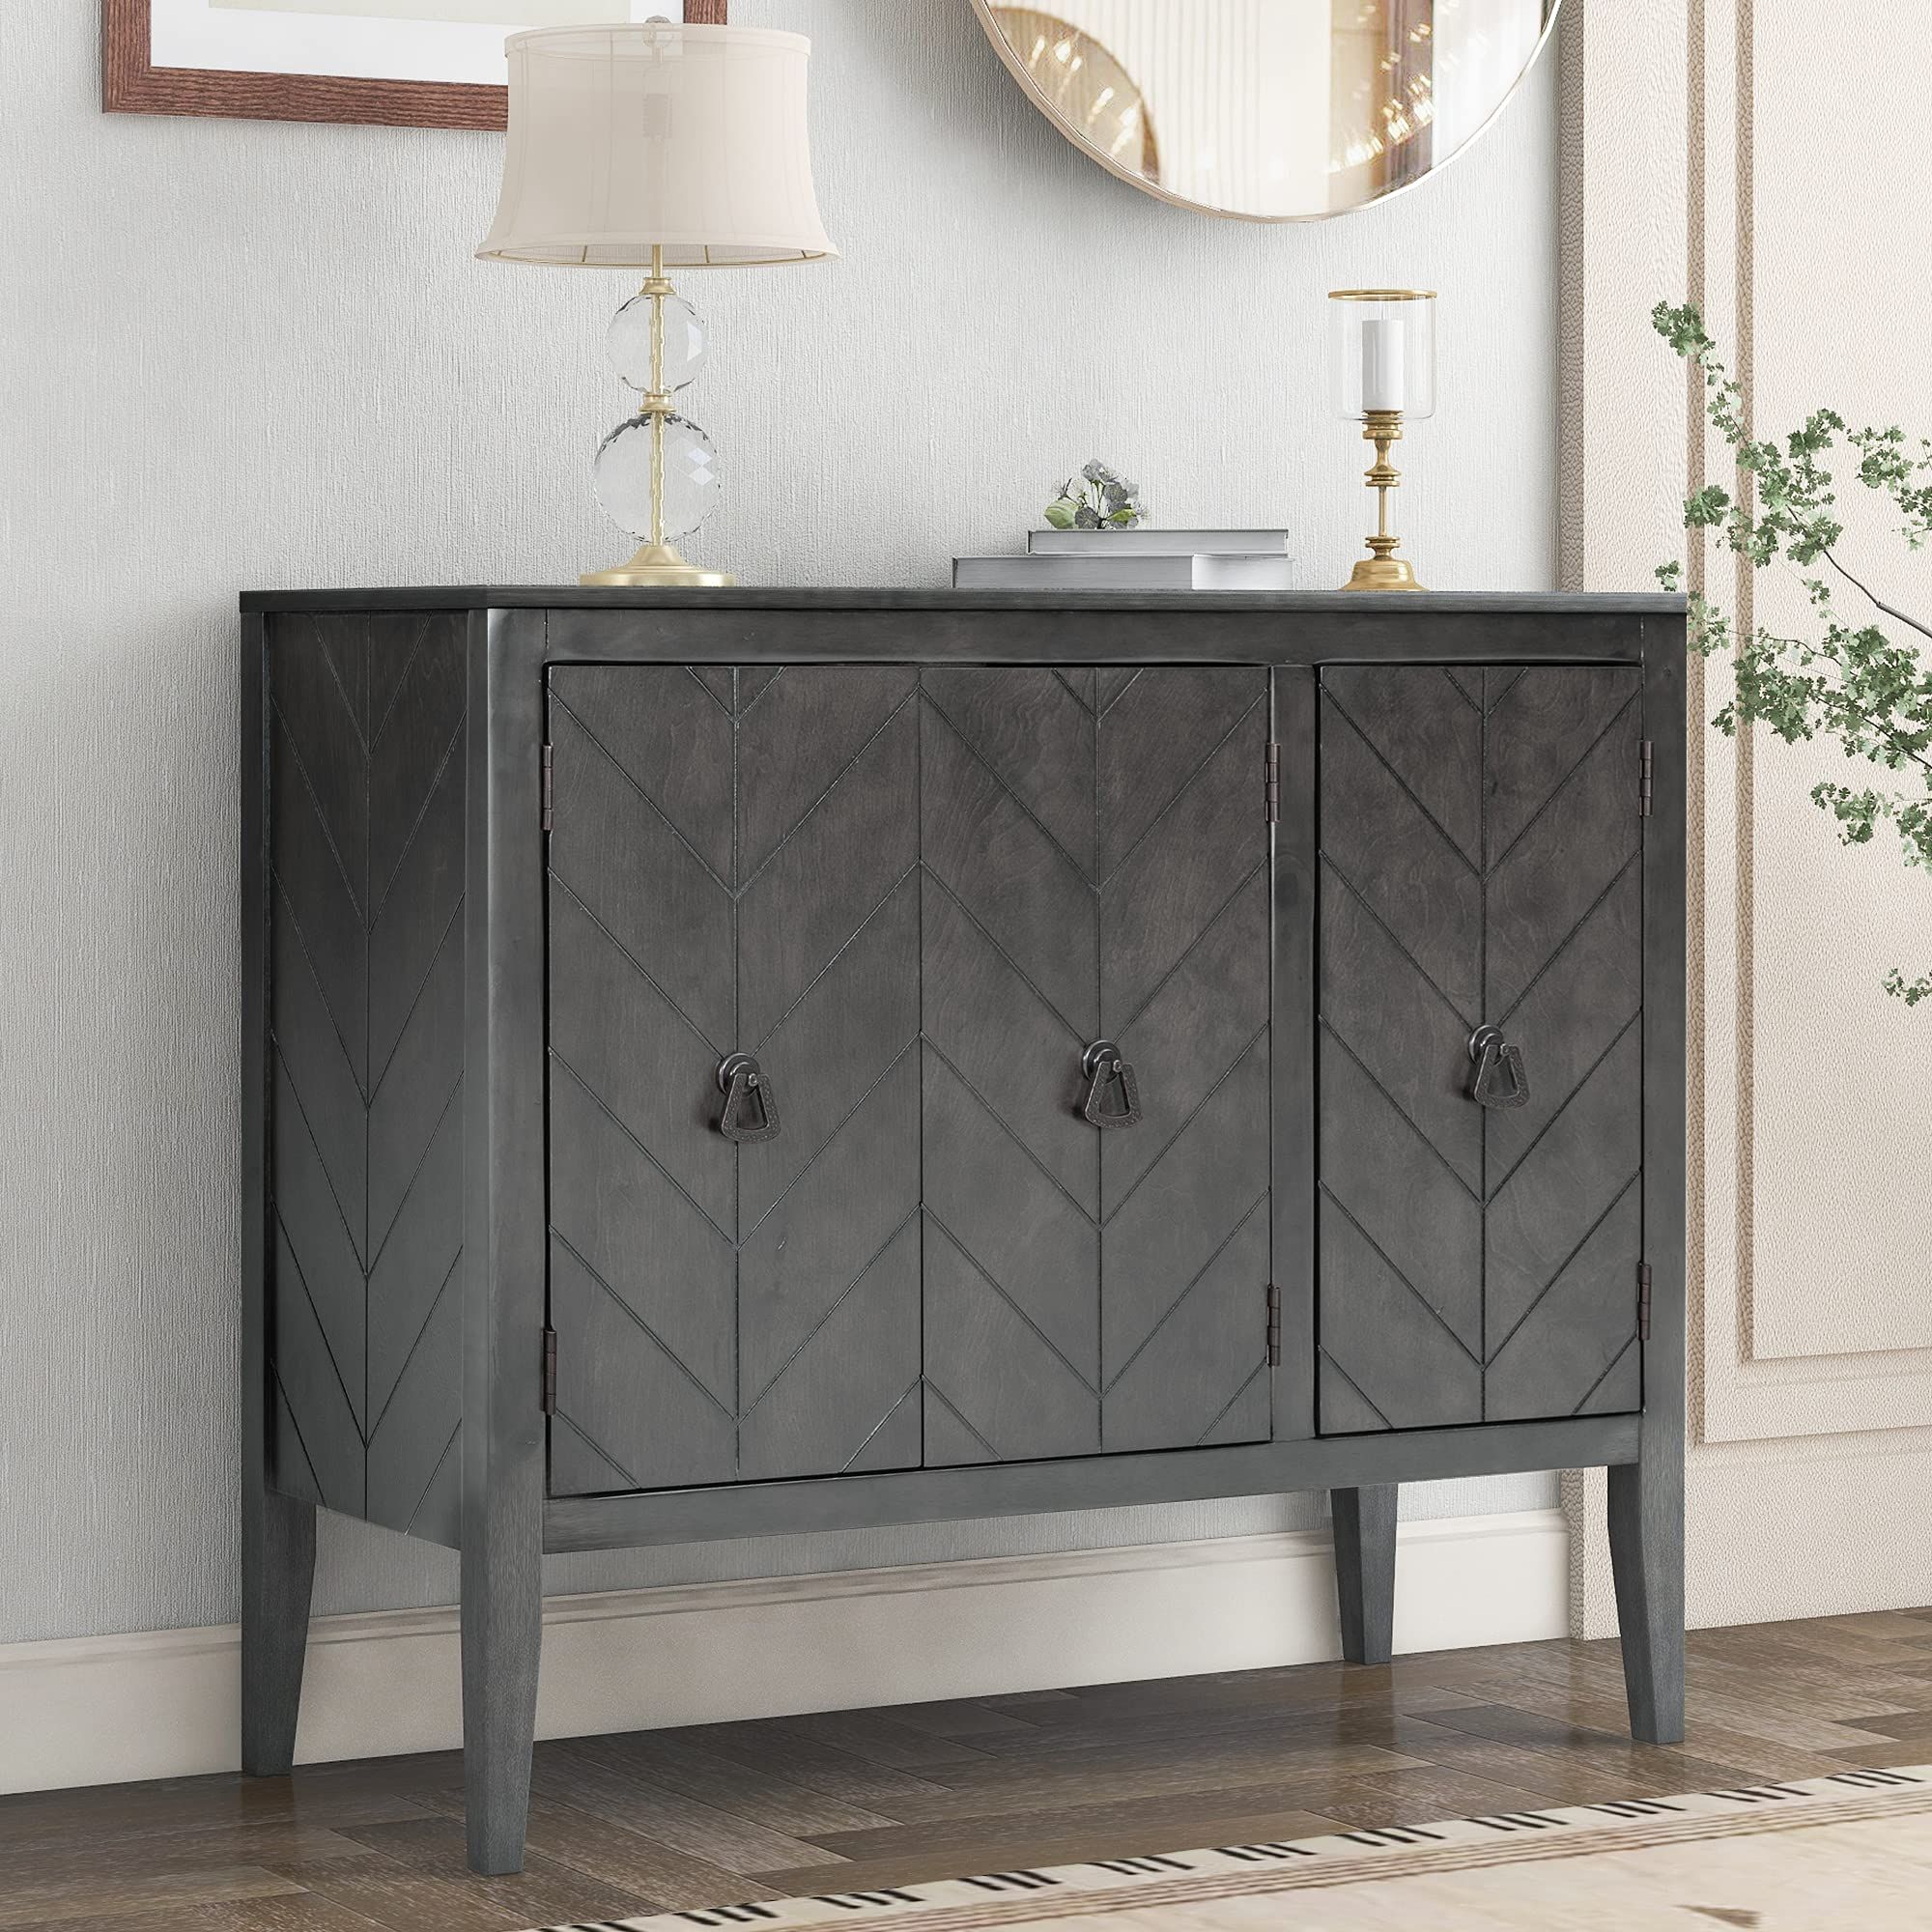 Antique Storage Sideboards With Doors With Famous Amazon: Knocbel Antique Storage Cabinet With Doors And Adjustable  Shelf, Solid Wood Buffet Sideboard Entry Console Table For Living Room  Dining Room Kitchen, 37"lx15.7"wx31.5"h : Home & Kitchen (Photo 6 of 10)